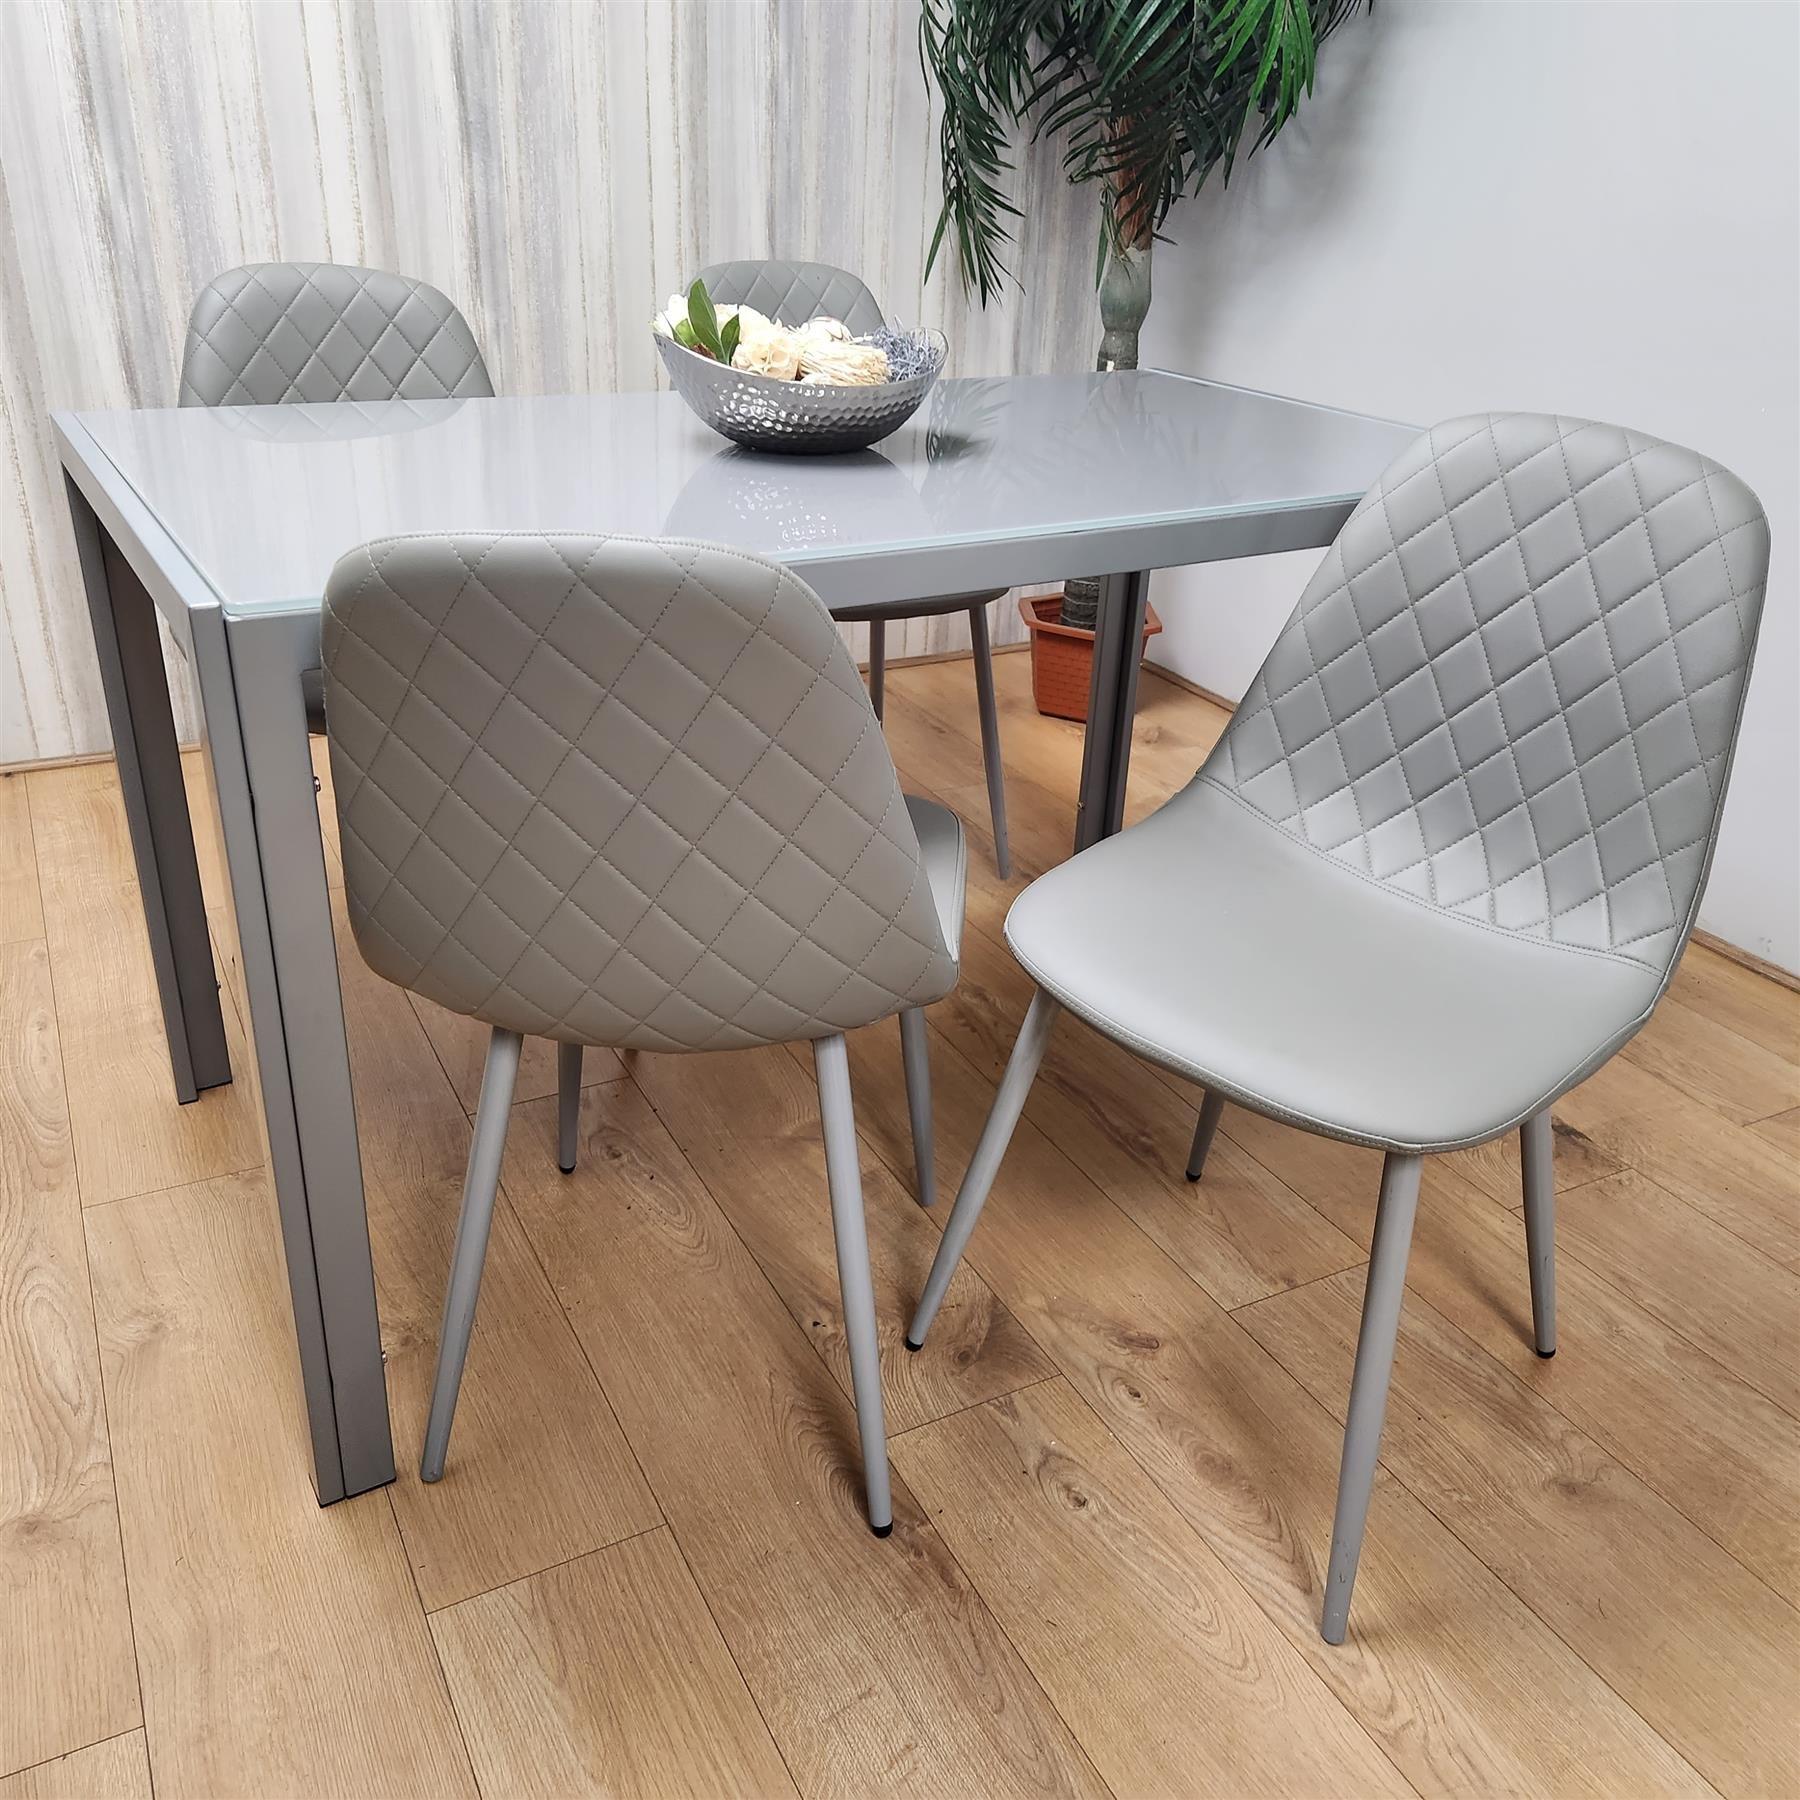 Glass Dining table and 4 grey leather chairs  Grey Glass Table And 4 Chairs kitchen dining room furn